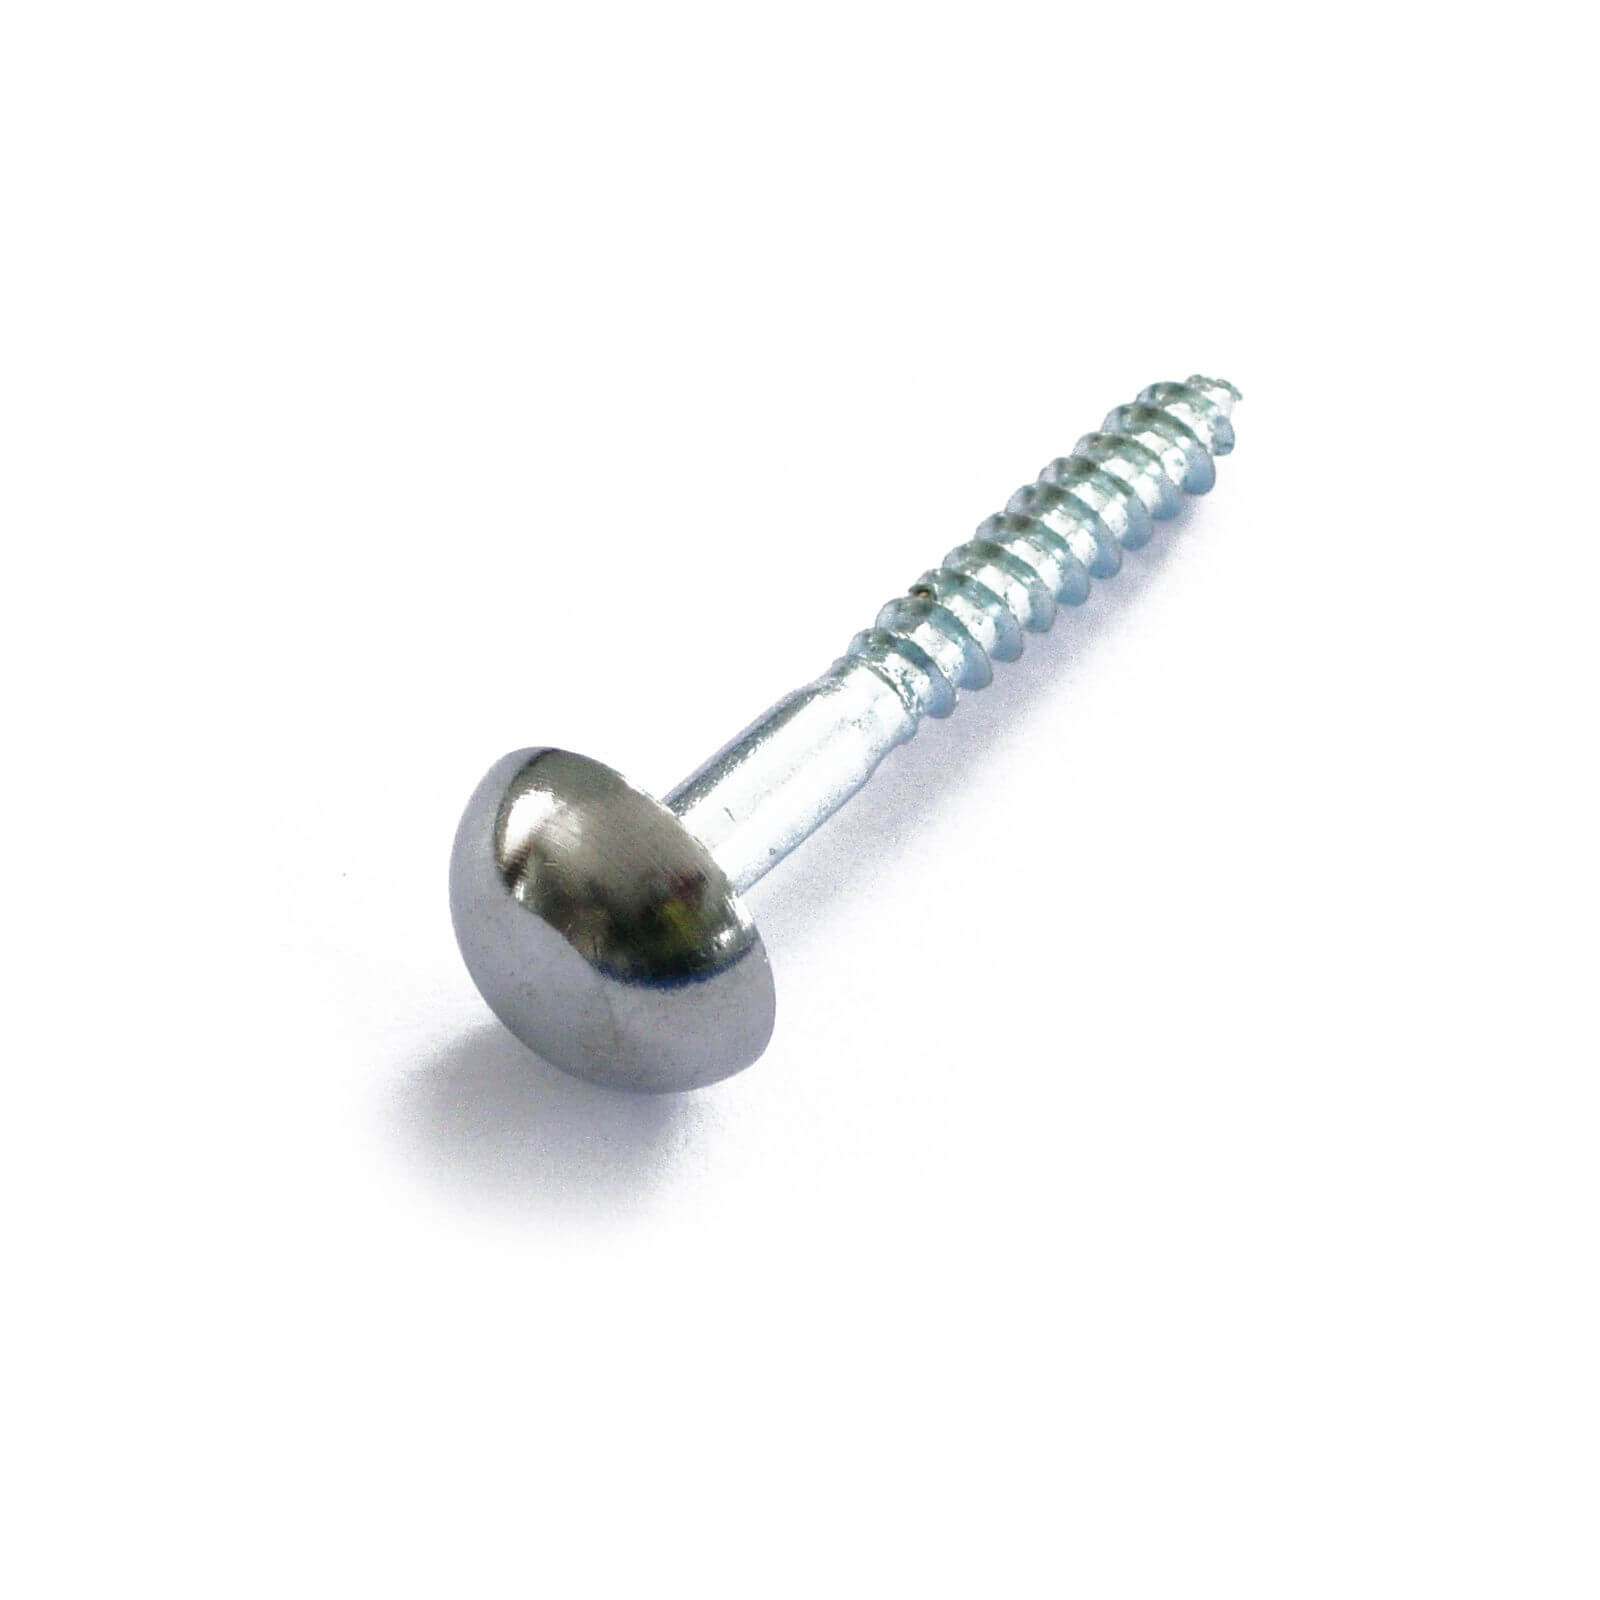 Mirror Screw - Chrome Plated - 4 x 30mm - 4 Pack